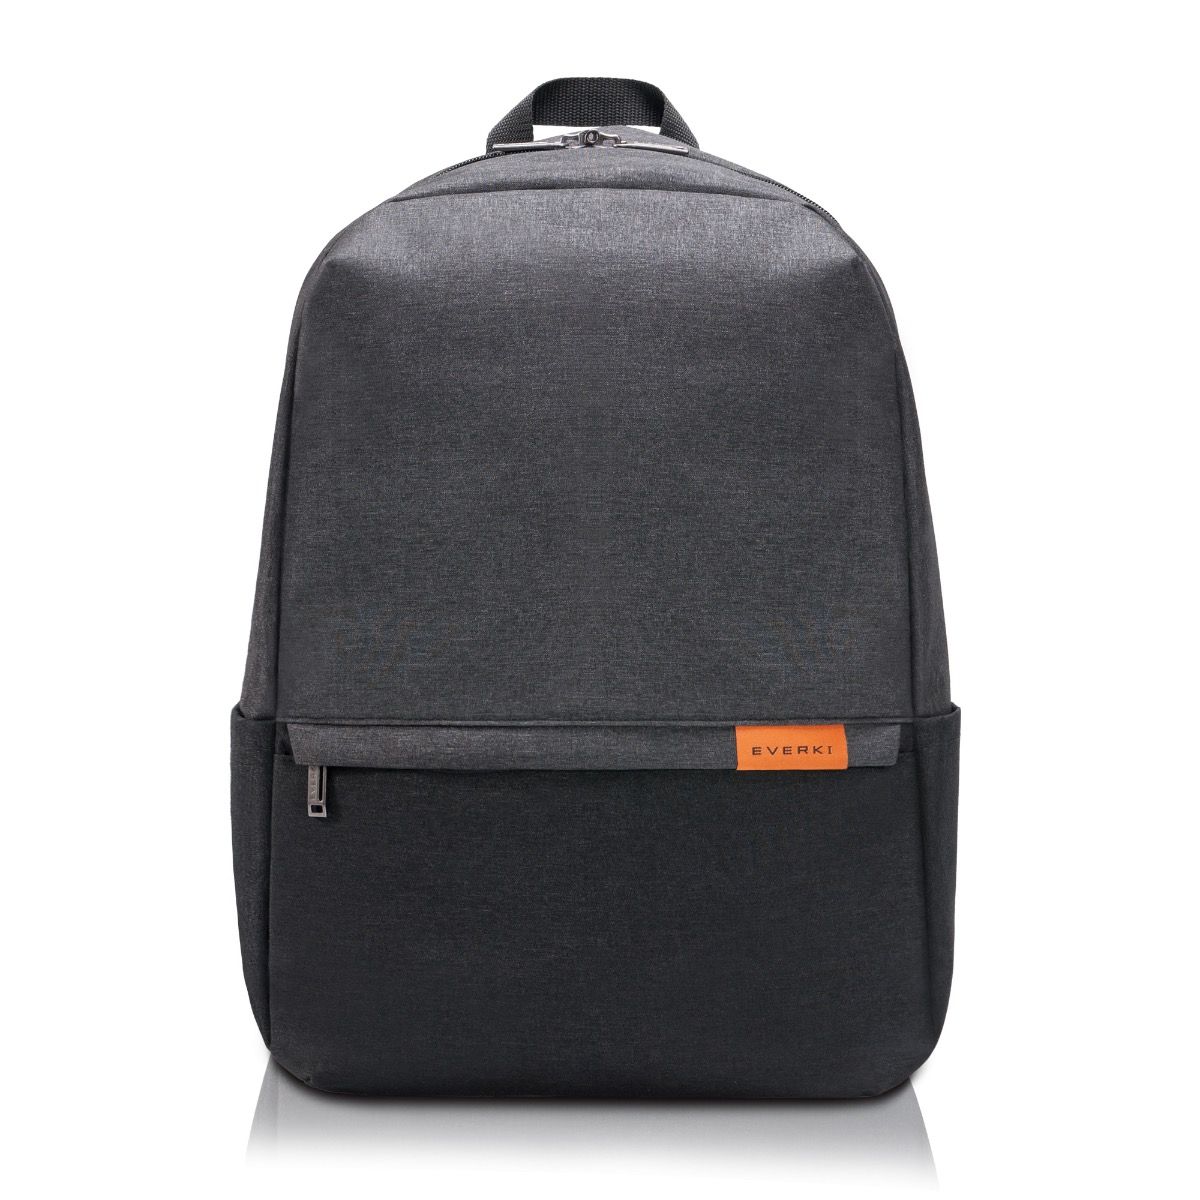 EVERKI EKP106 Light and Compact Laptop Backpack (Fits up to 15.6-Inch Devices)